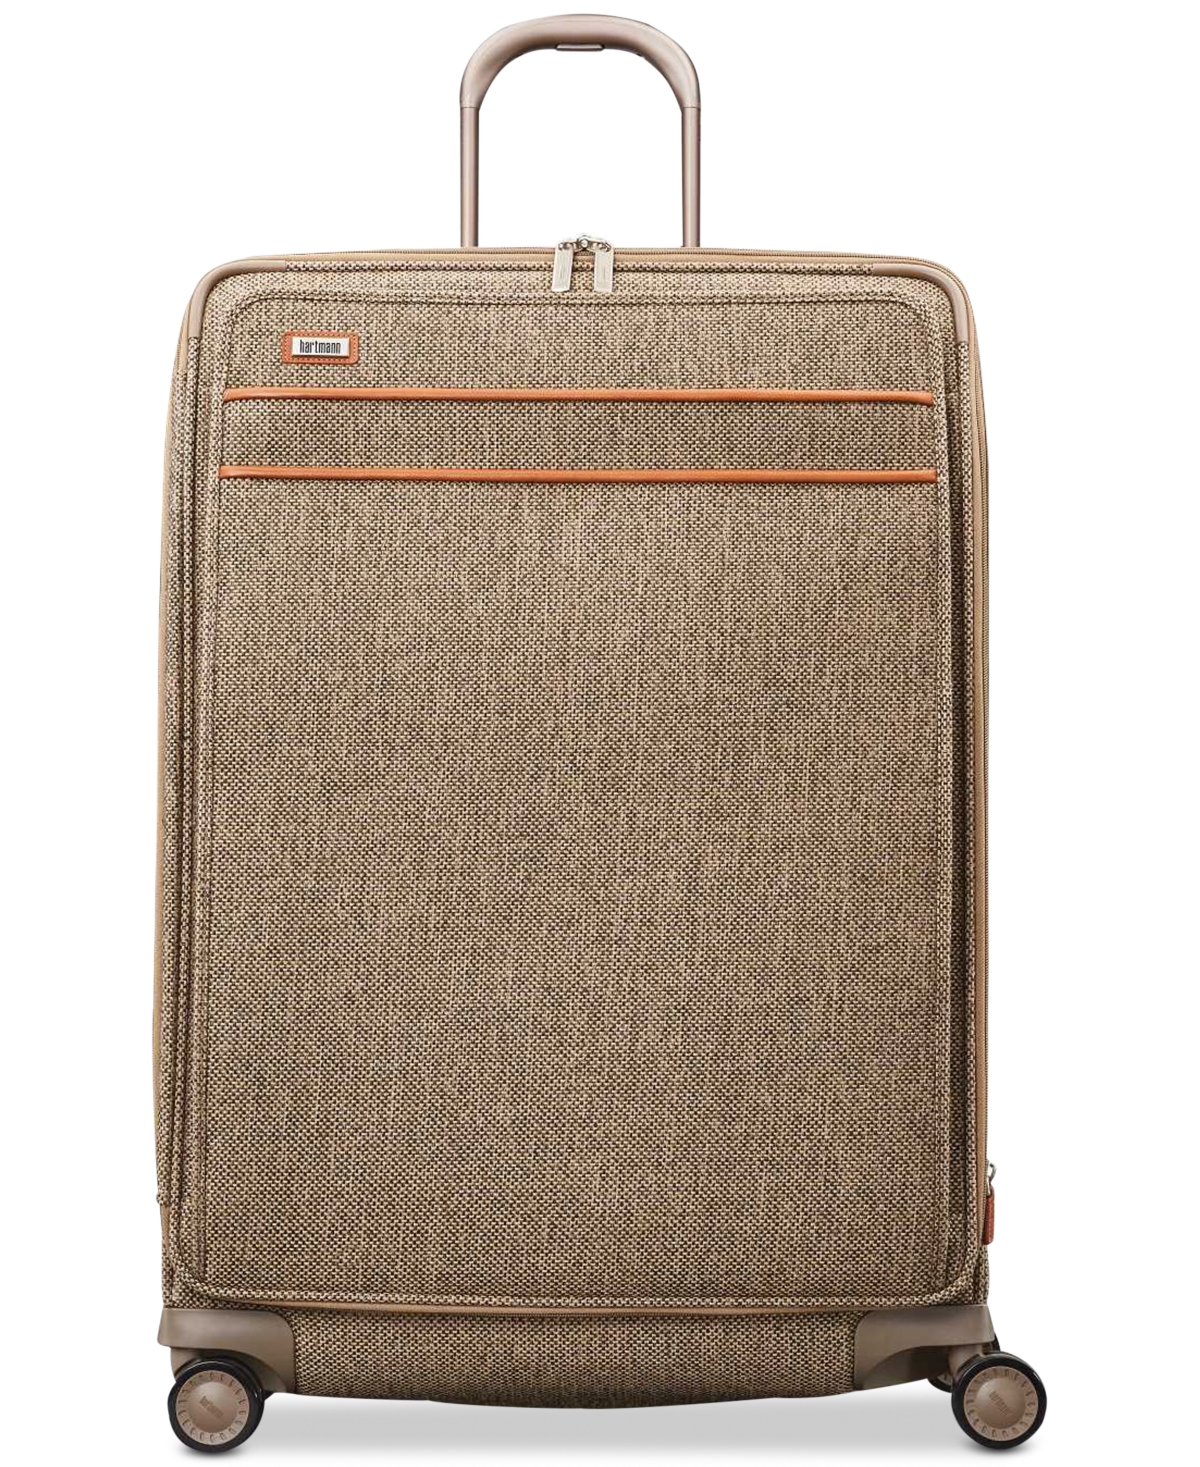 Tweed Legend 30" Extended Journey Expandable Spinner Suitcase - Natural Tweed